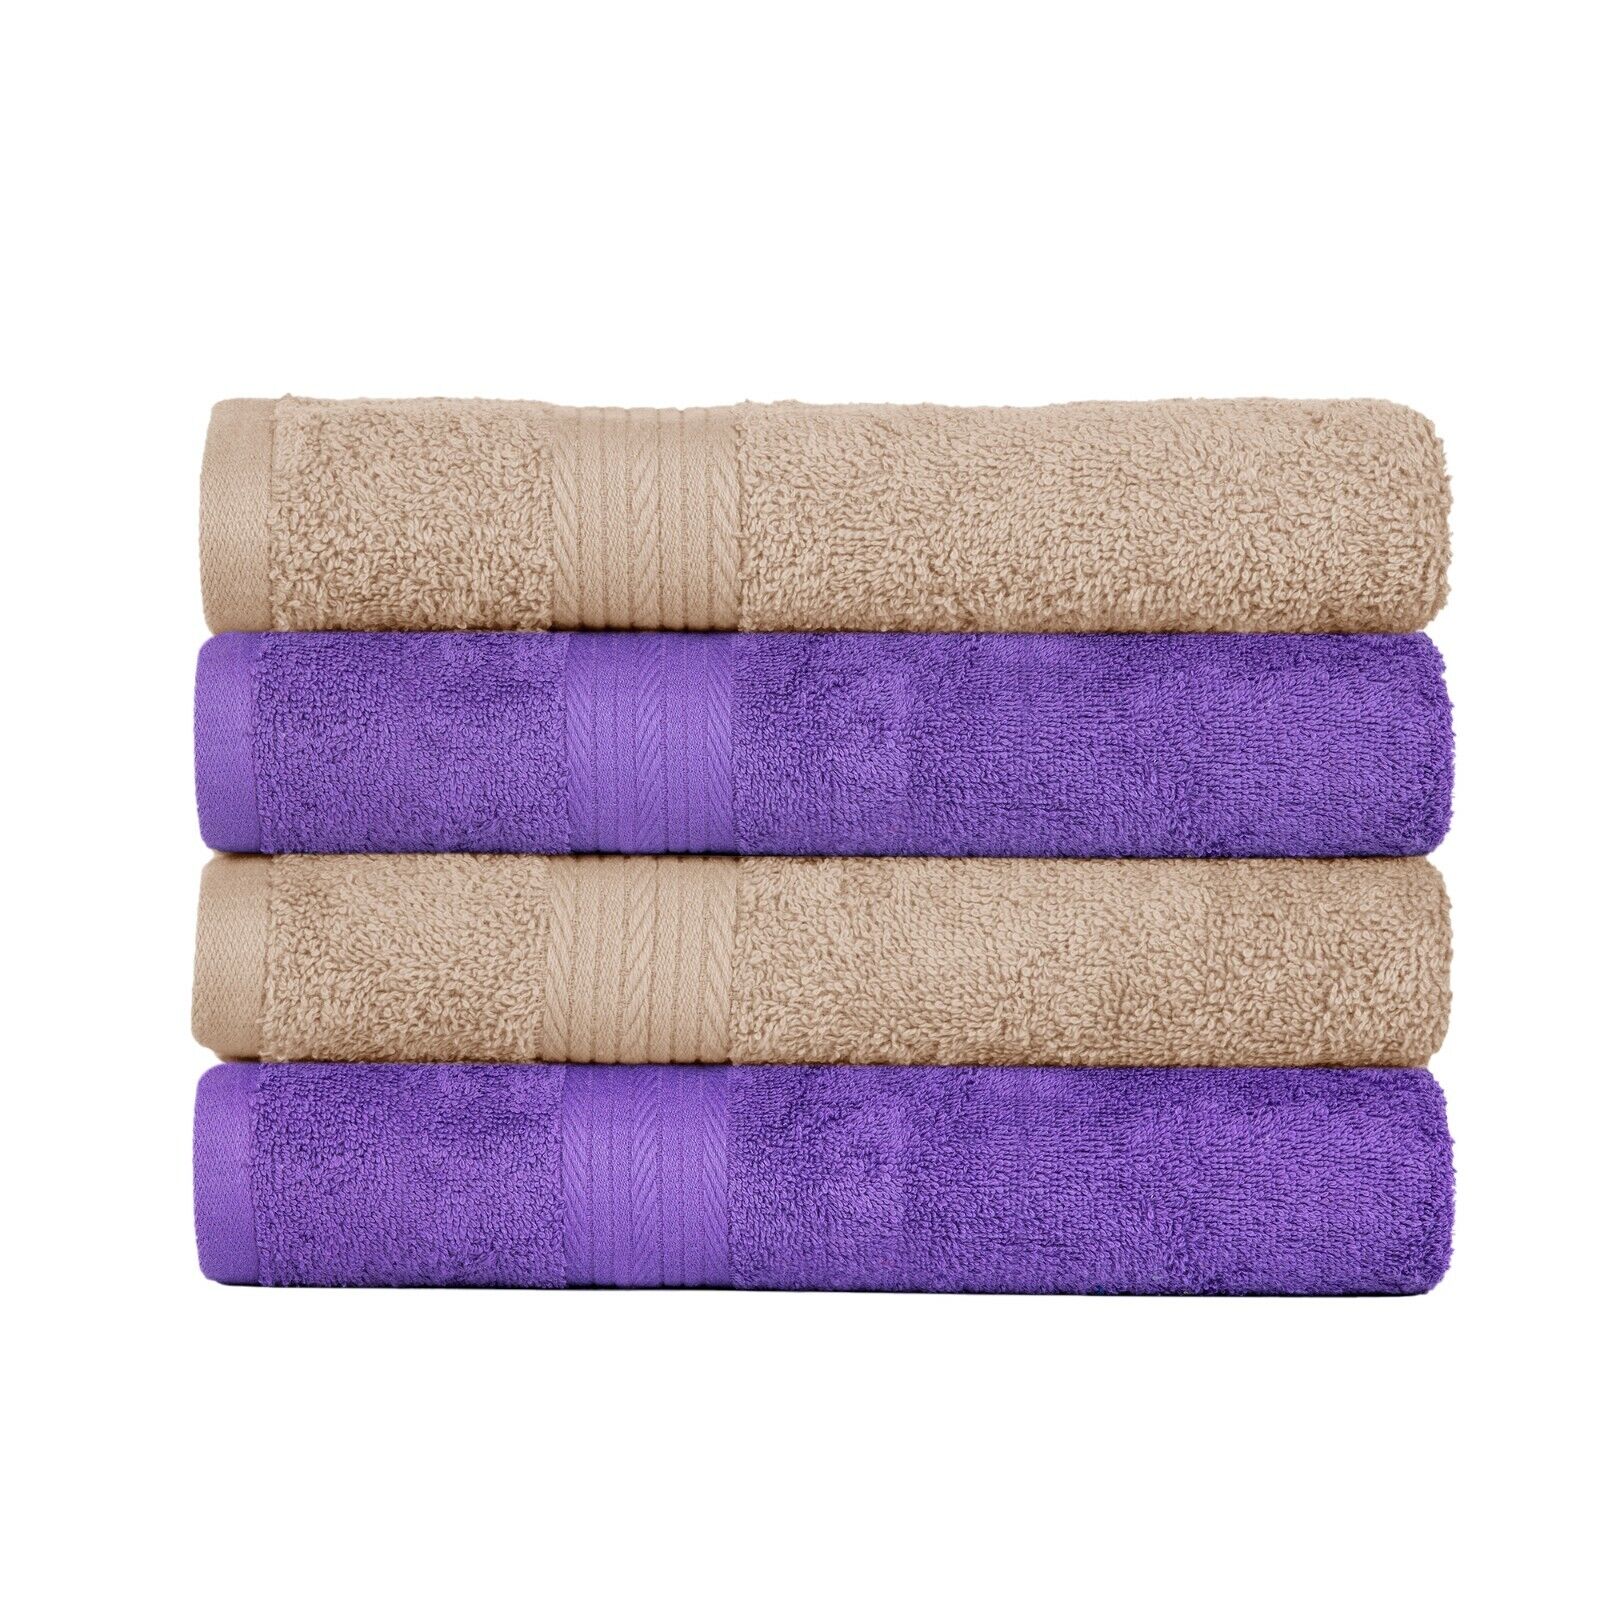 Ample Decor Hand Towel Set of 4 Assorted Colors 100% Cotton Highly Absorbent